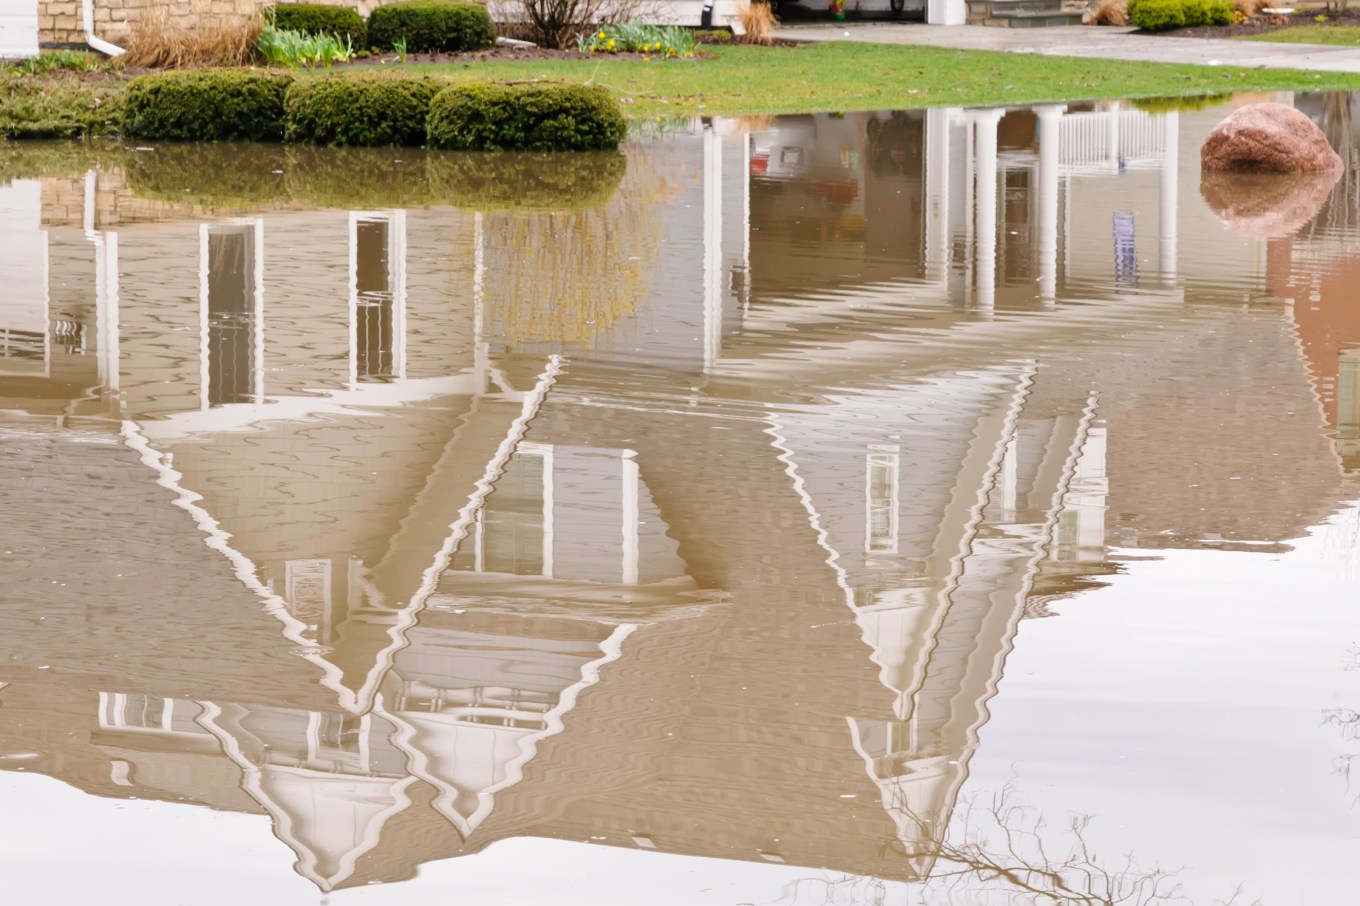 A house reflected in rainwater pooled after a storm due to improper drainage.